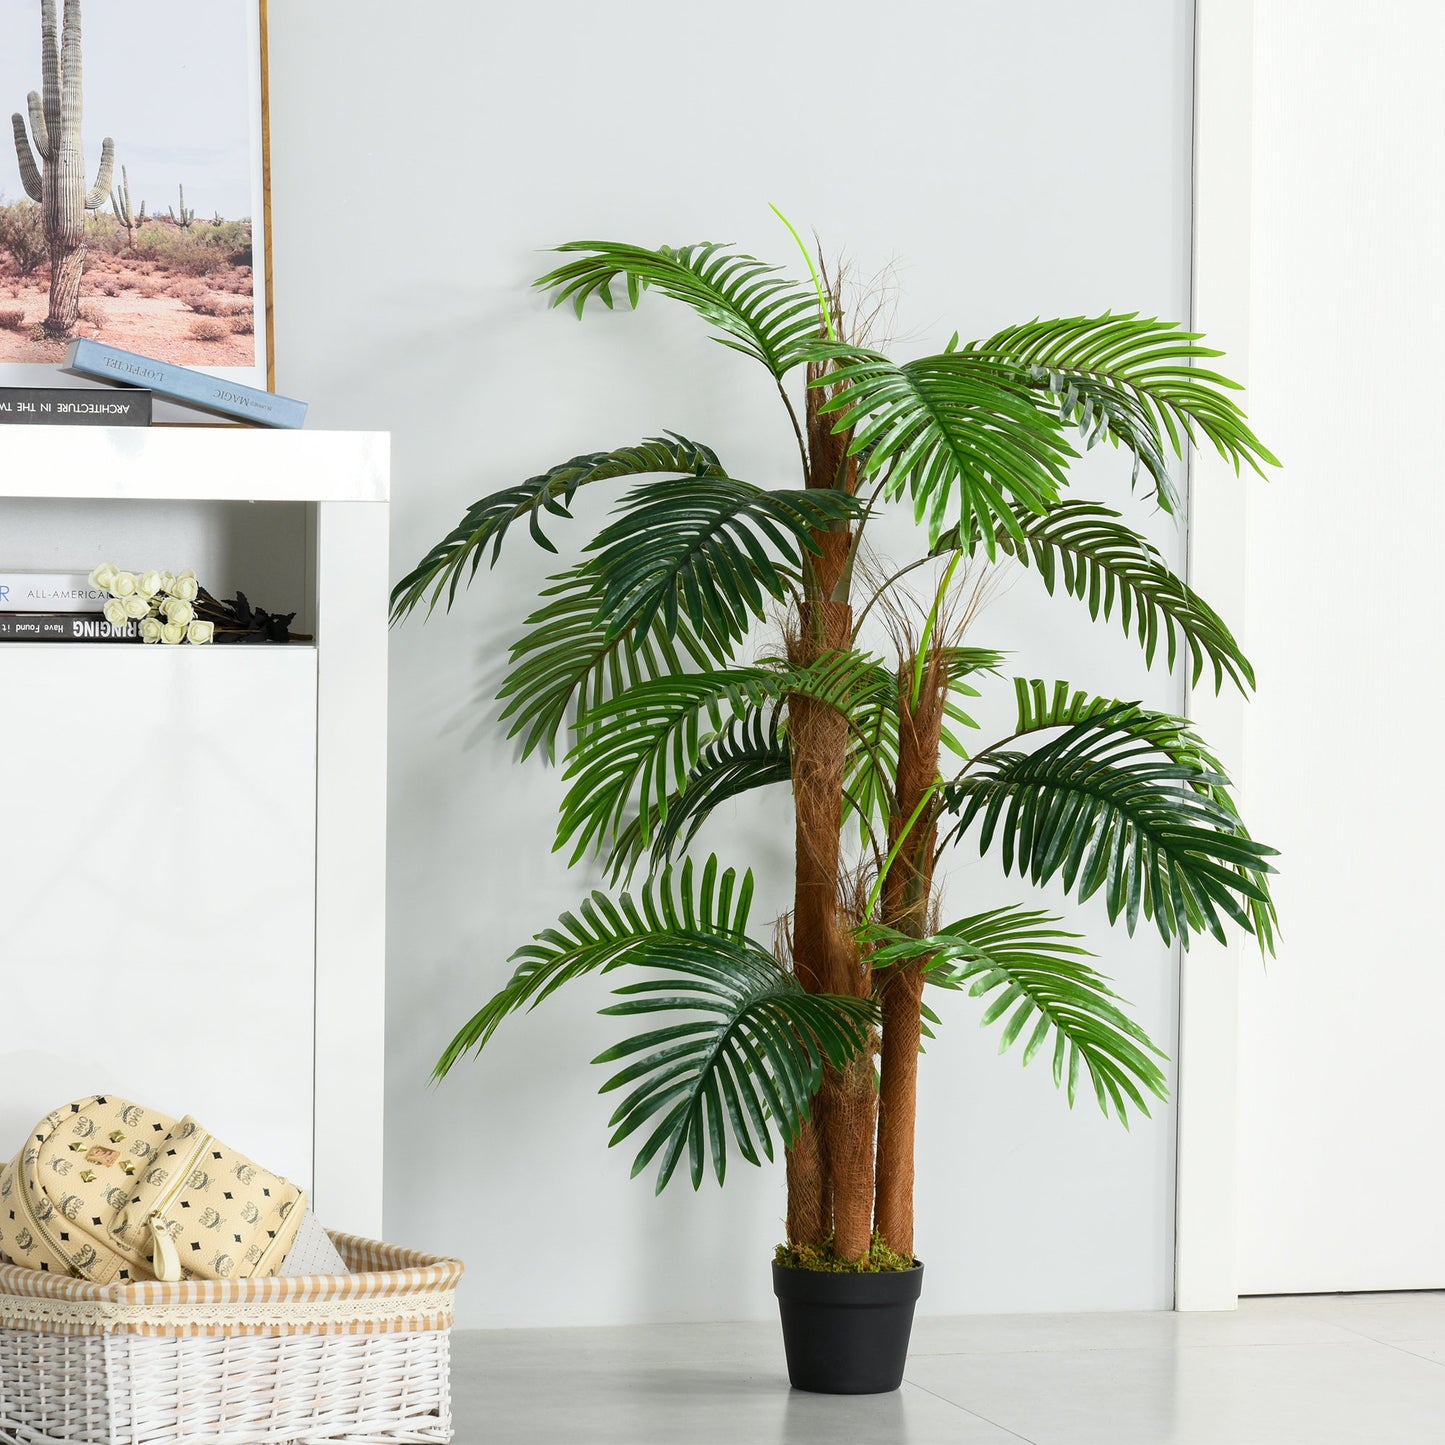 Outsunny 120cm/4FT Artificial Palm Tree Decorative Plant  w/ 19 Leaves Nursery Pot Fake Plastic Indoor Outdoor Greenery Home Office Décor